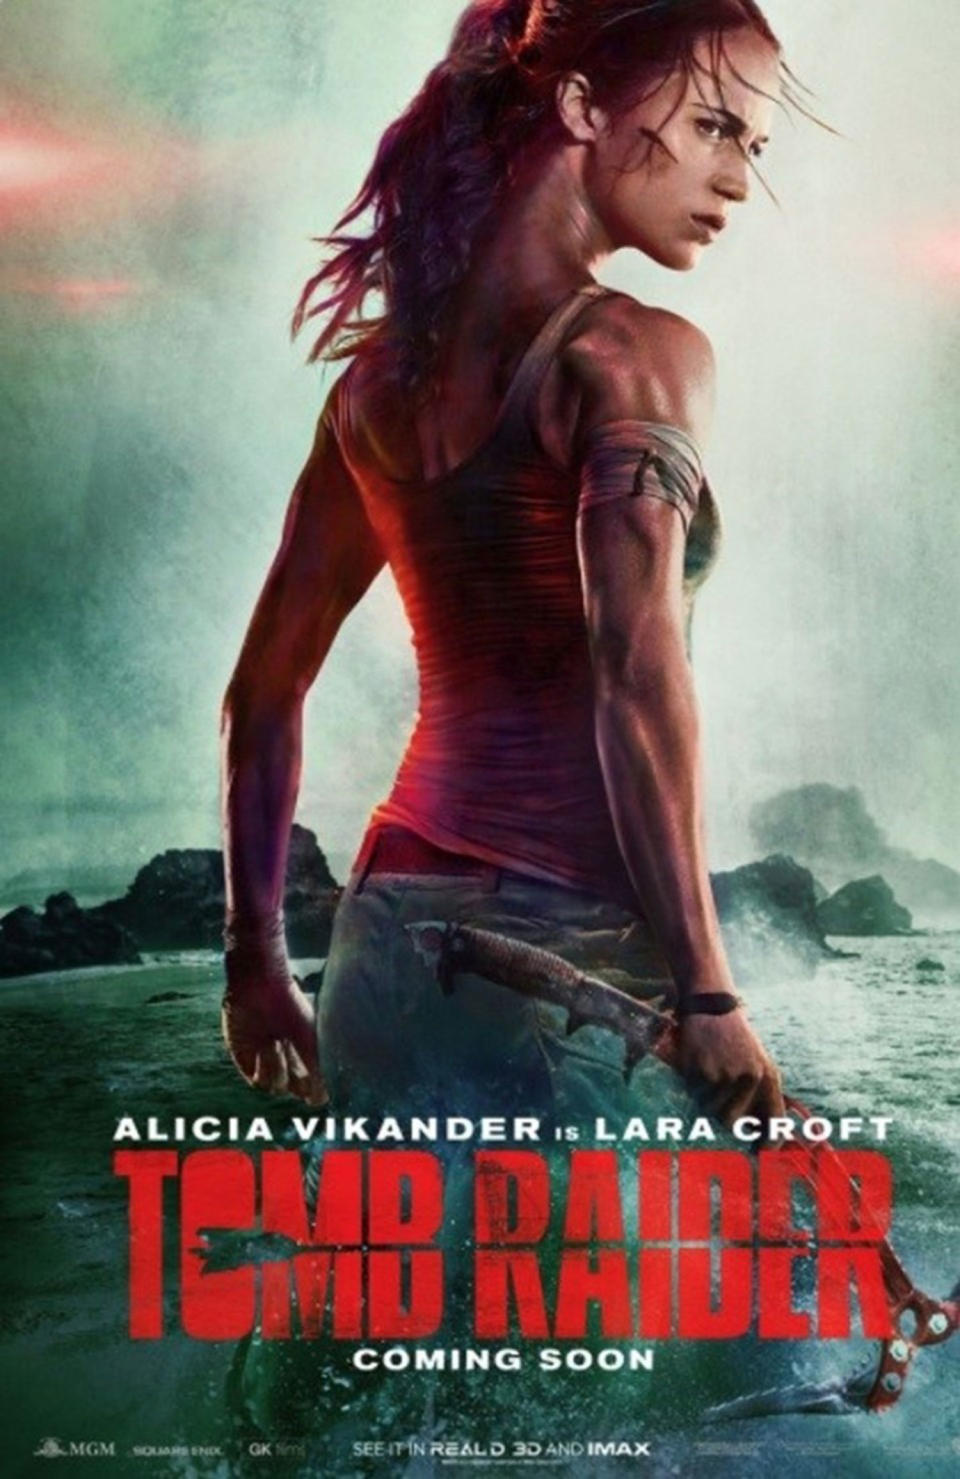 Movie poster Photoshop disasters 2017: ‘Tomb Raider’